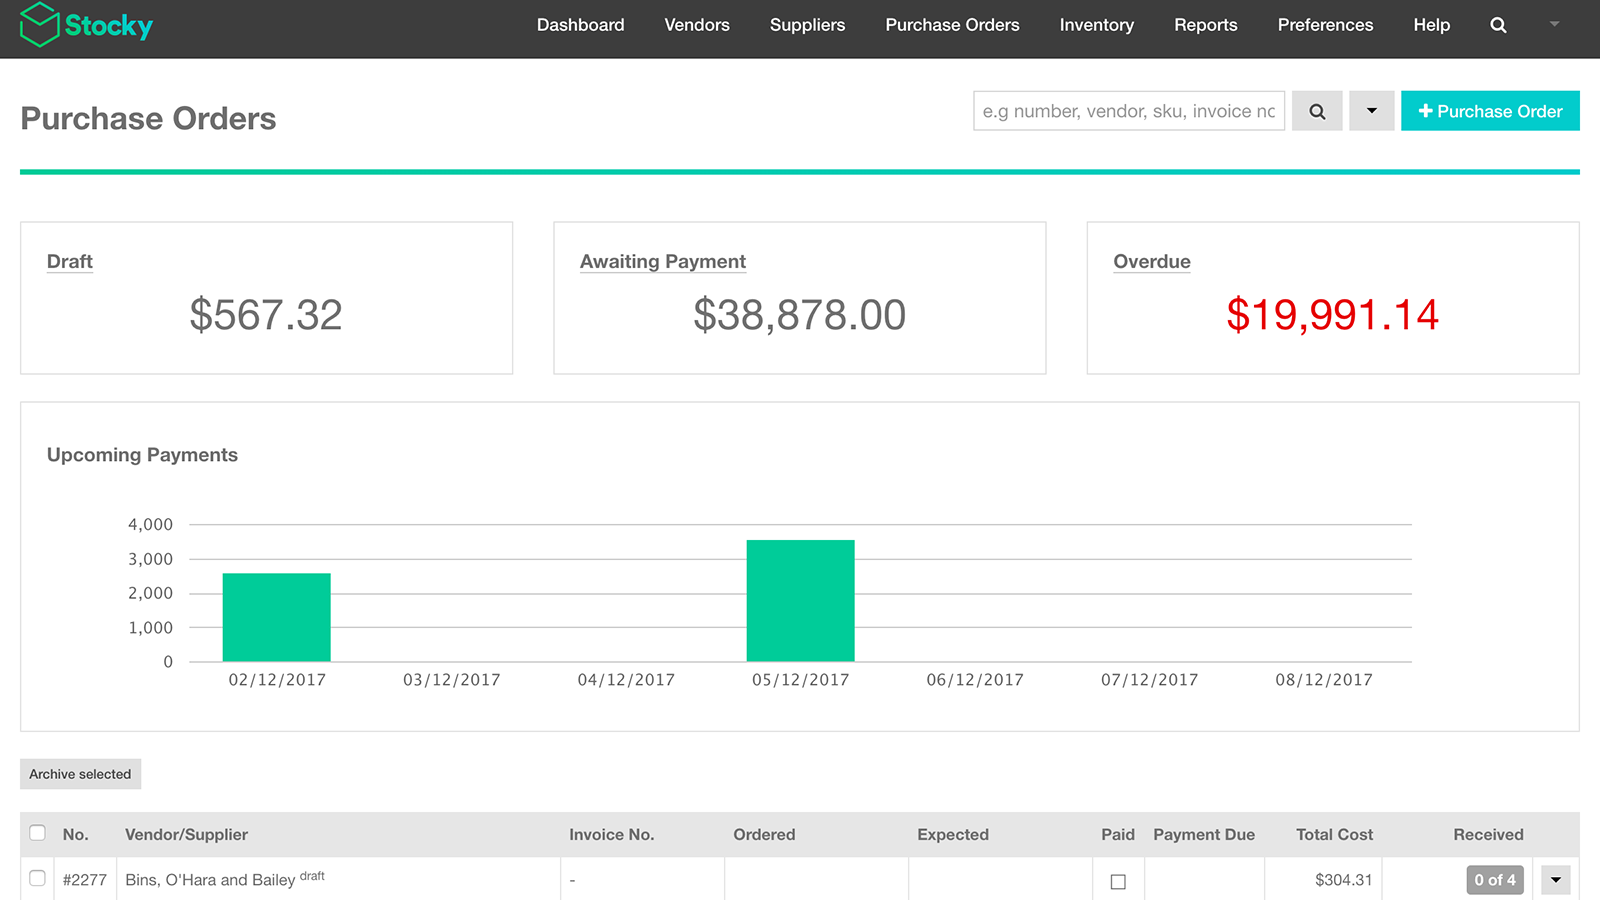 See the status of your incoming purchase orders